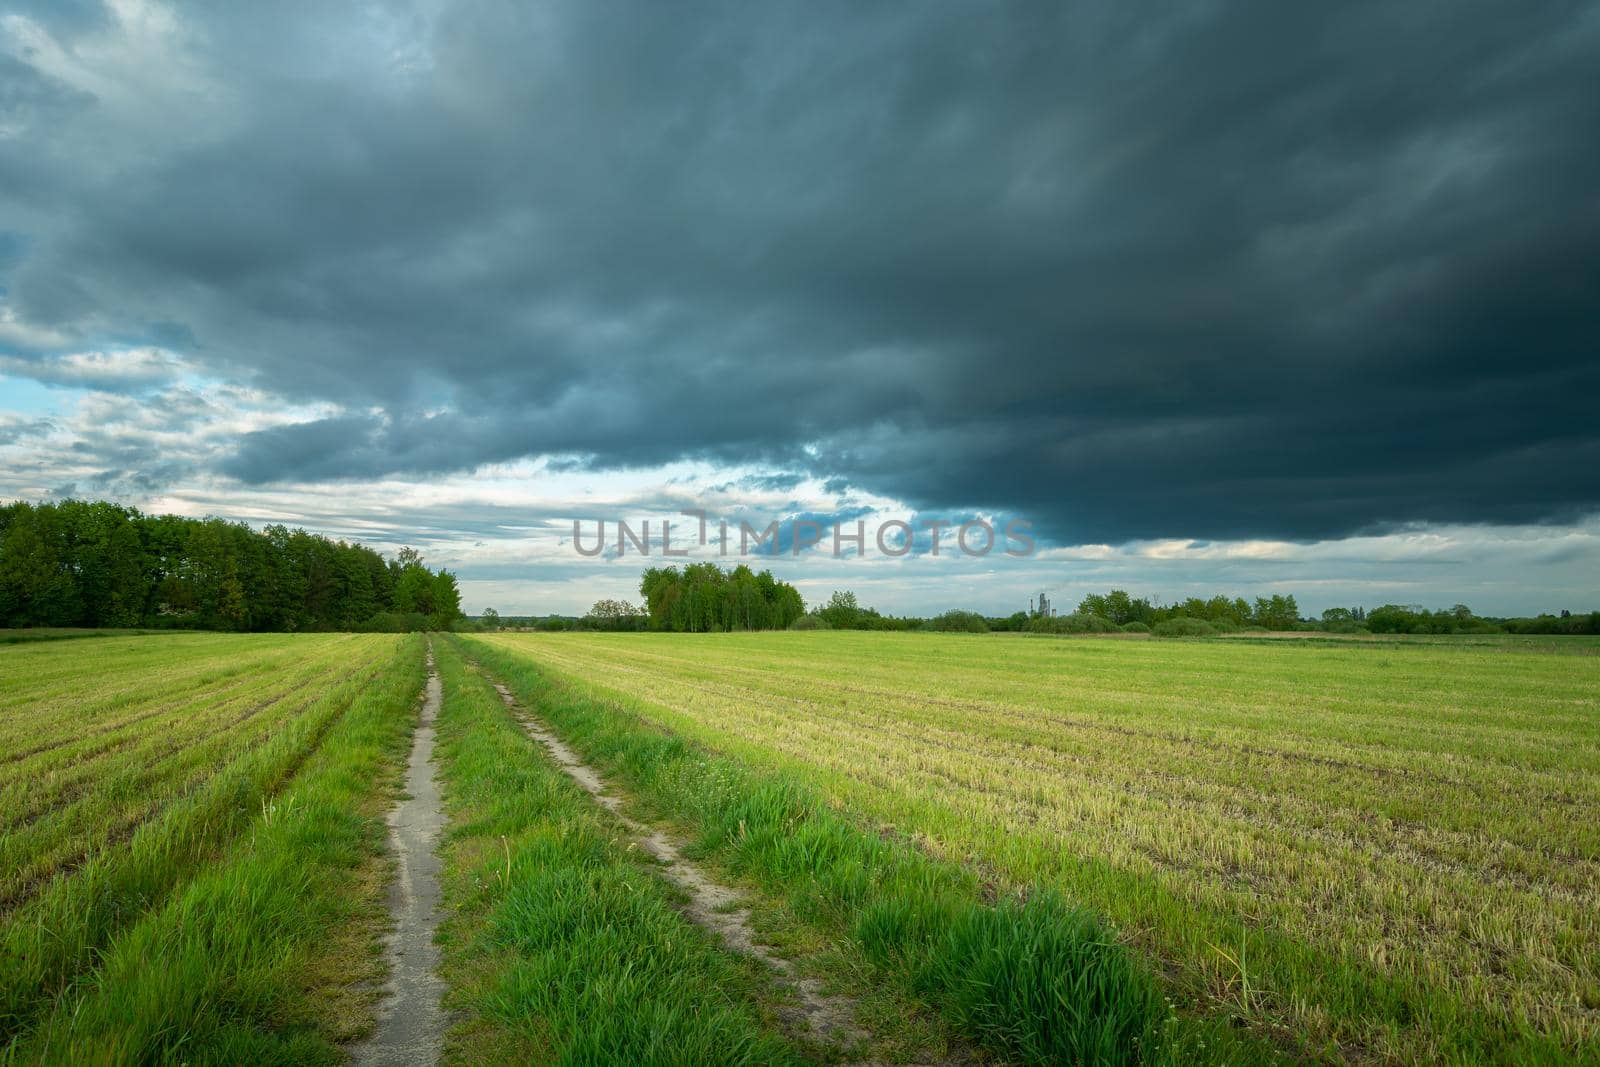 Road through stubble and cloudy sky, spring landscape, Nowiny, Poland